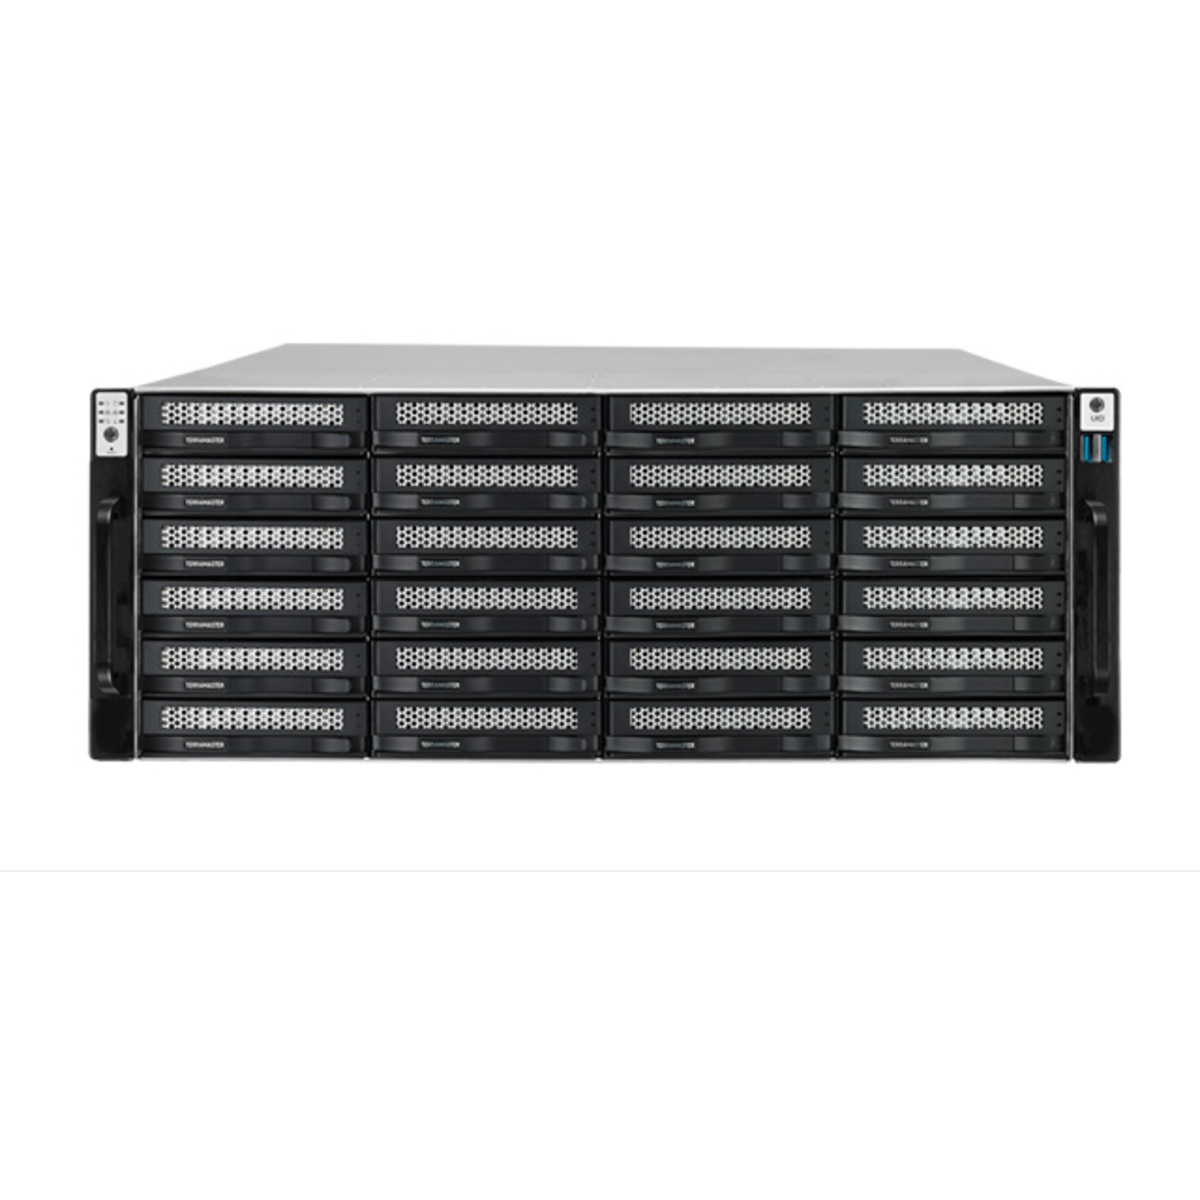 TerraMaster U24-722-2224 216tb 24-Bay RackMount Large Business / Enterprise NAS - Network Attached Storage Device 18x12tb Western Digital Red Pro WD121KFBX 3.5 7200rpm SATA 6Gb/s HDD NAS Class Drives Installed - Burn-In Tested U24-722-2224